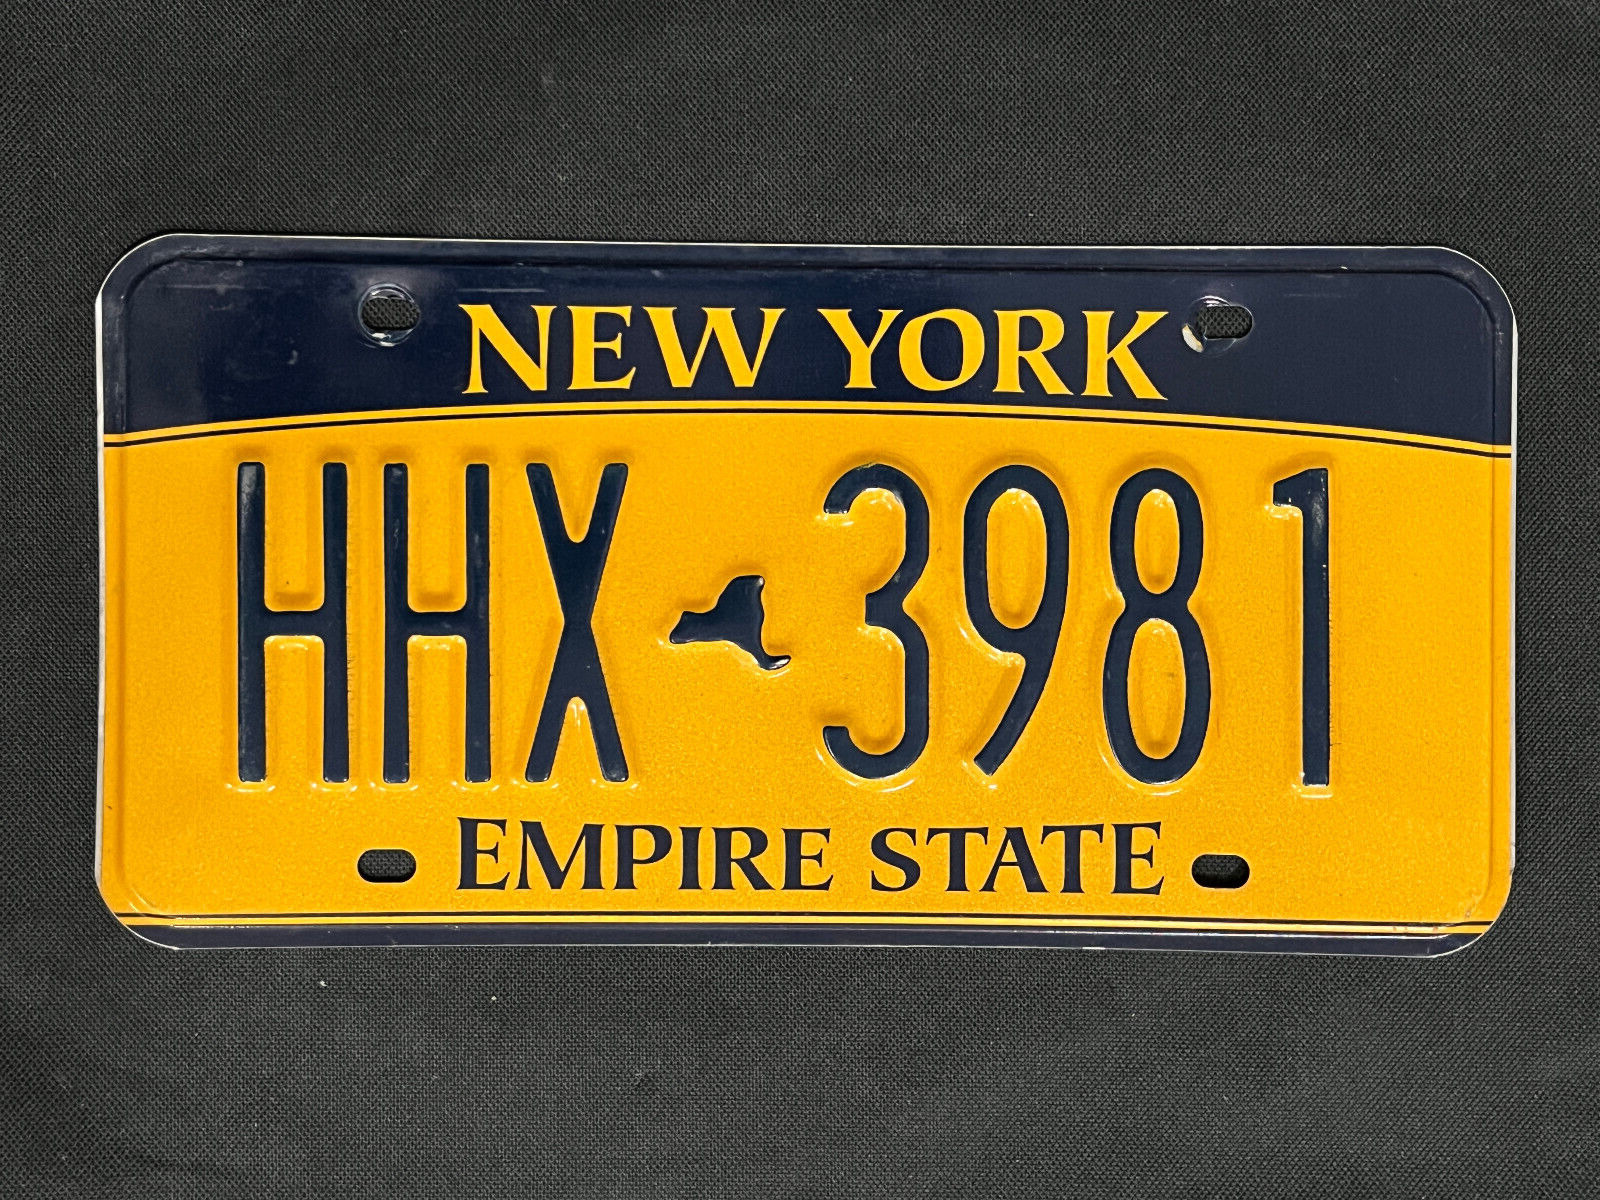 New York License Plate HHX-3981 ...... STATE MAP, EMPIRE STATE & TAXI CAB YELLOW